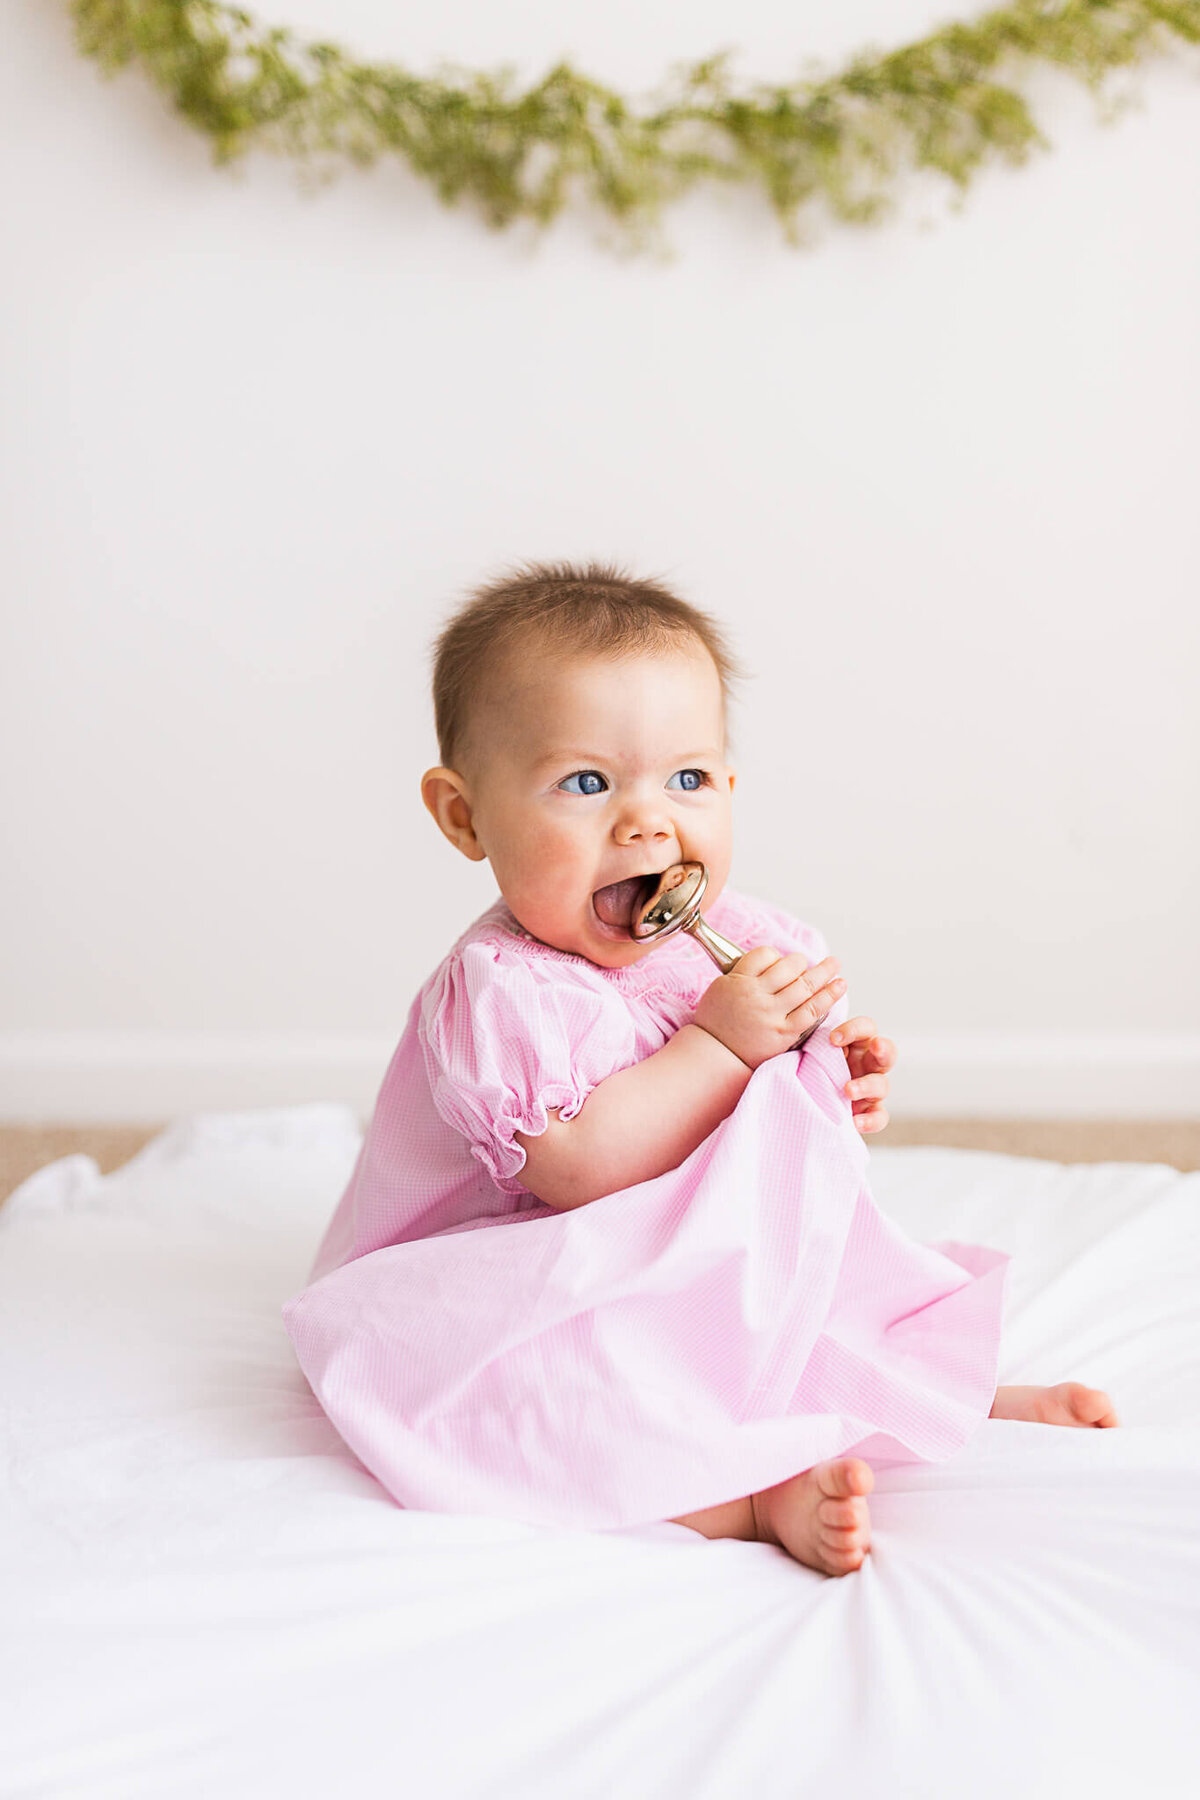 A six month old sitting by herself and putting a family heirloom rattle to her mouth